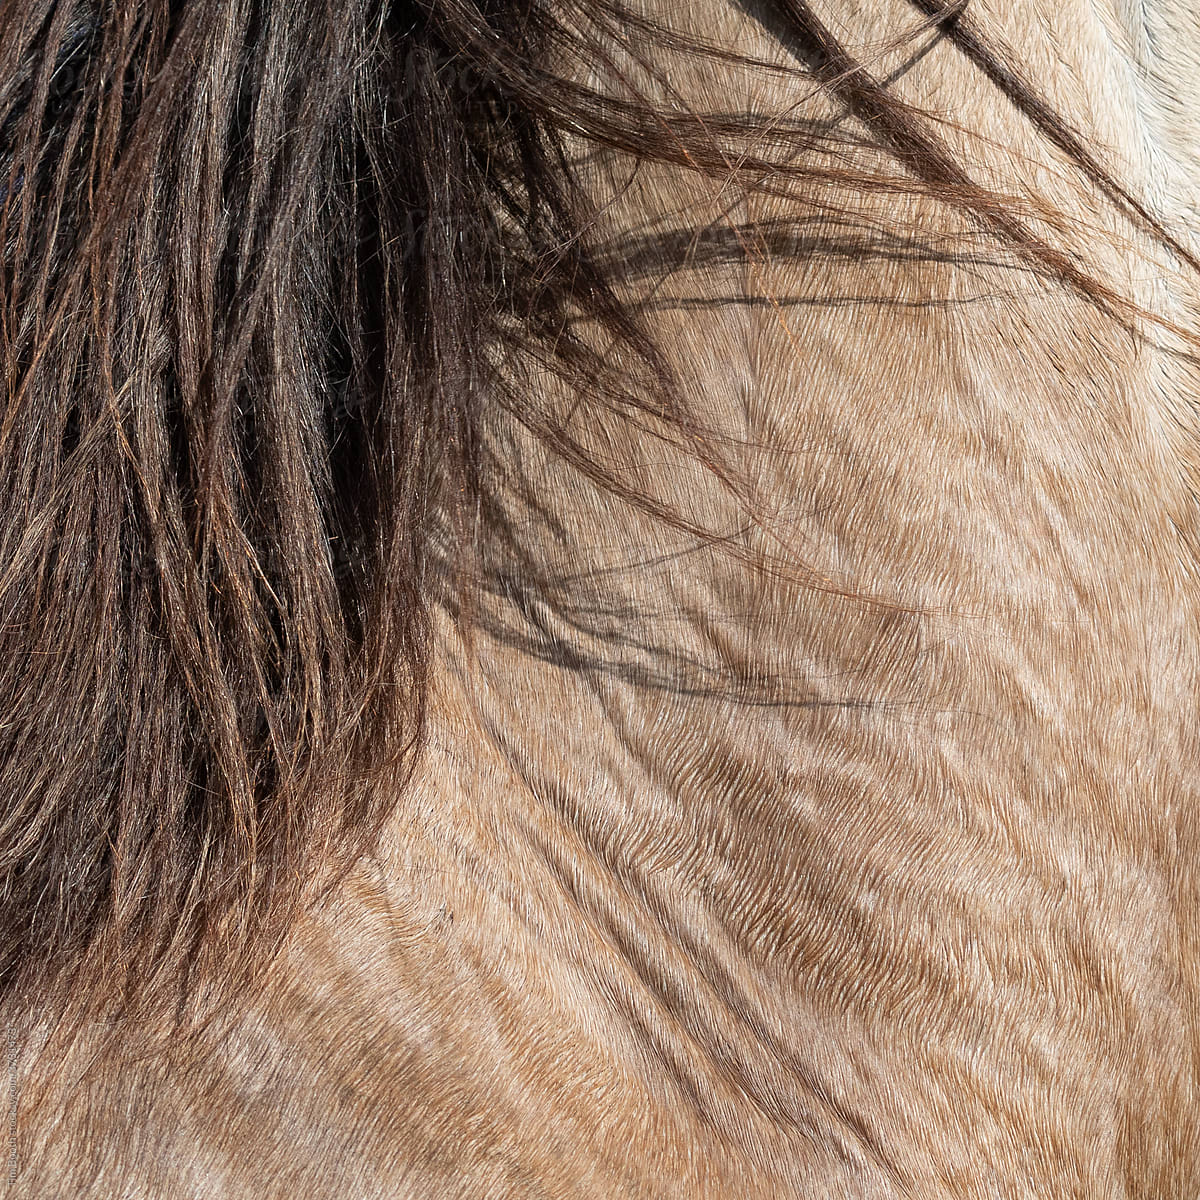 Close-up of horse\'s neck